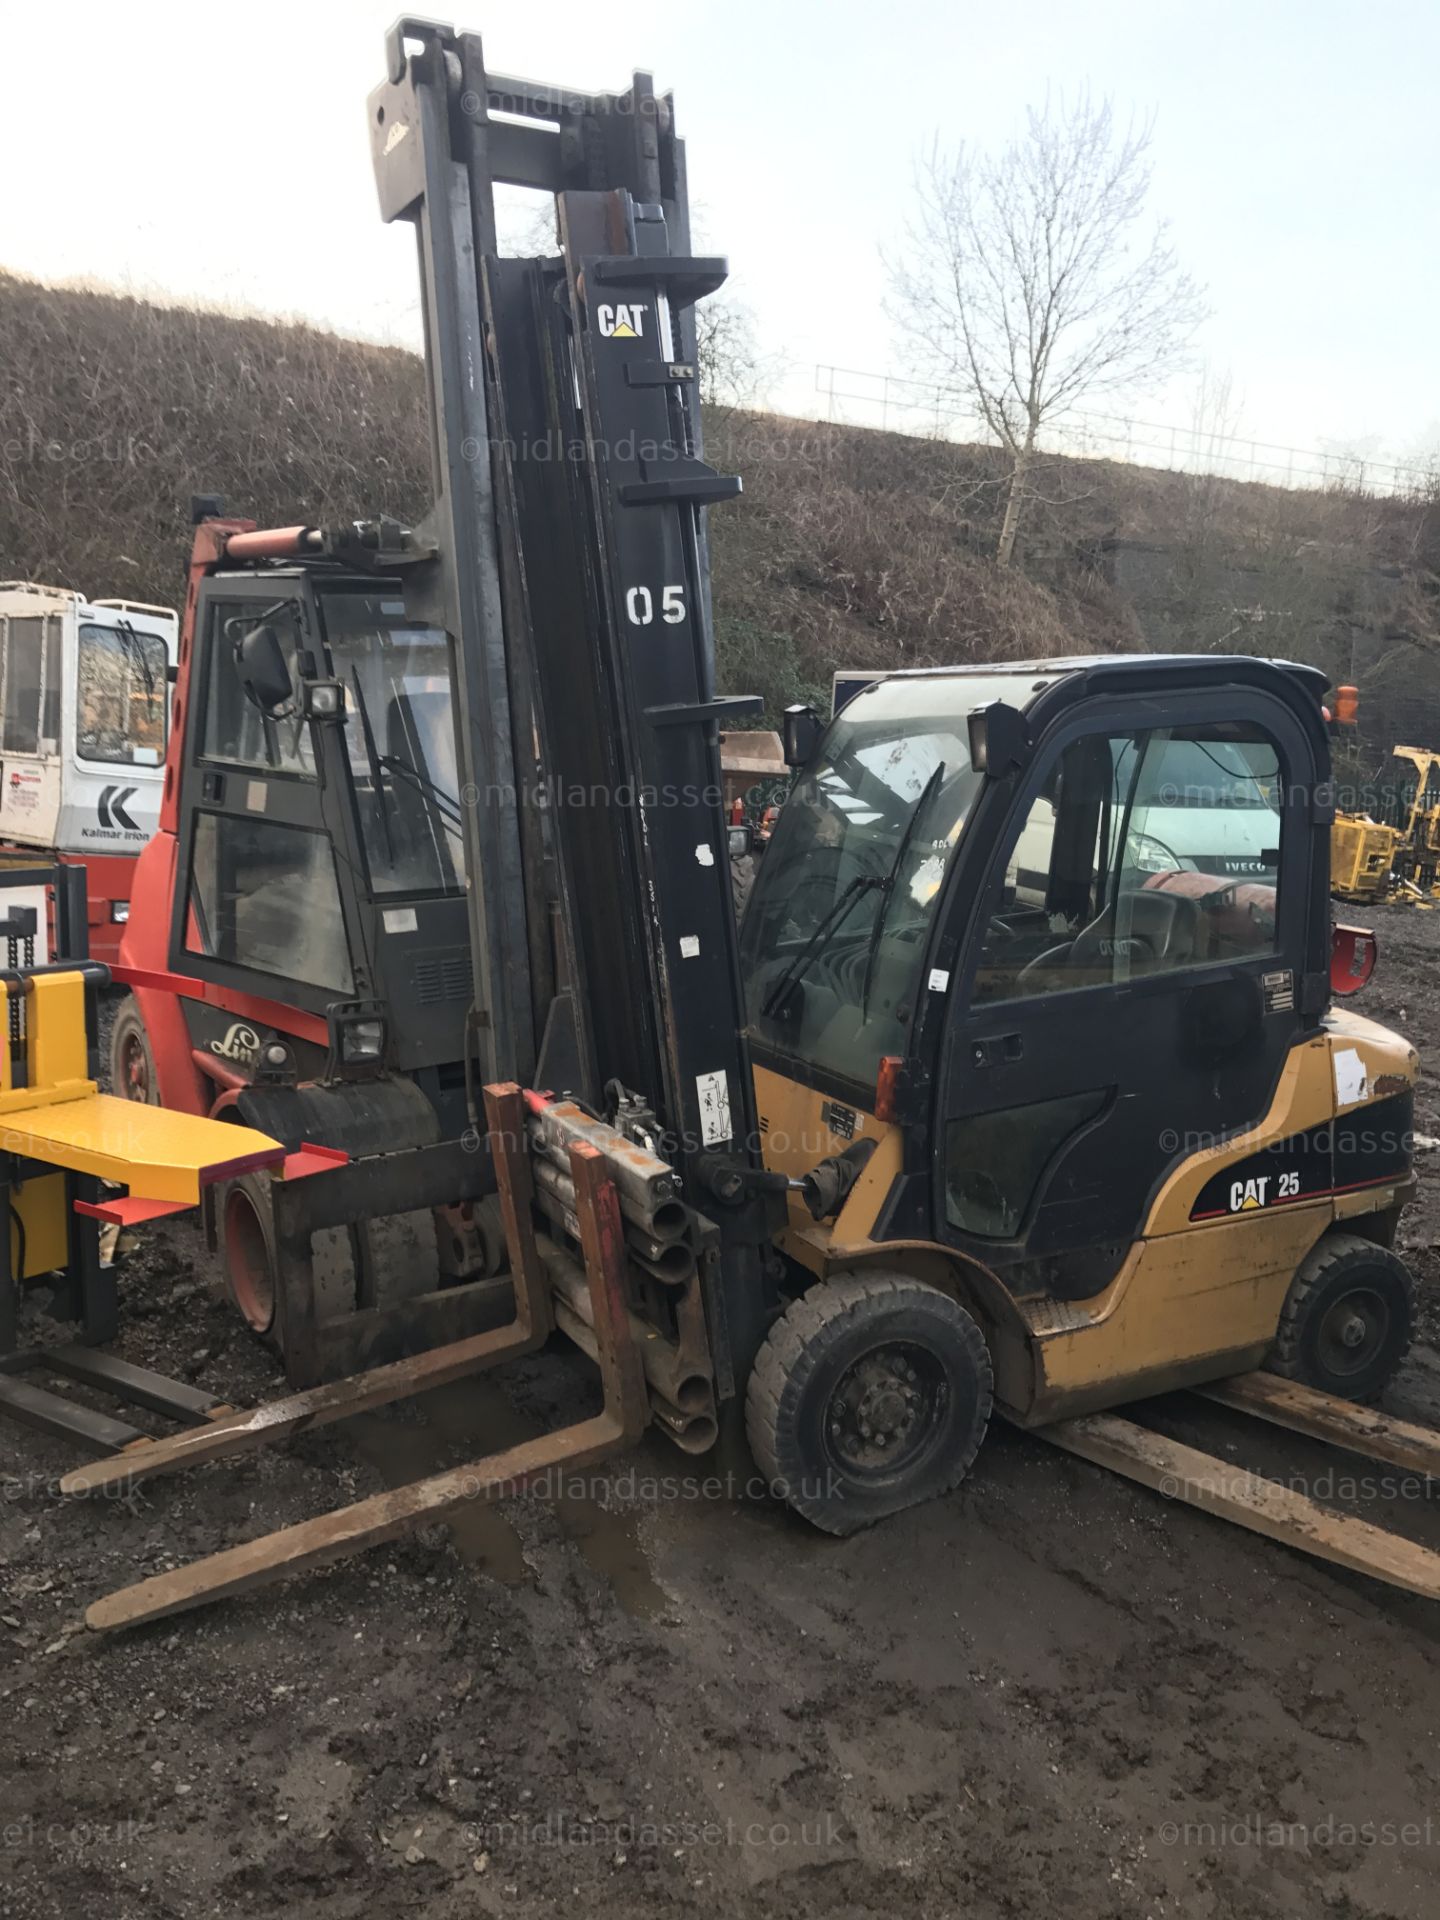 DS - 2007 CATERPILLAR 25 LPG FORK TRUCK   YEAR OF MANUFACTURE: 2007 RATED CAPACITY: 2,500 kg FORKS - Bild 2 aus 6